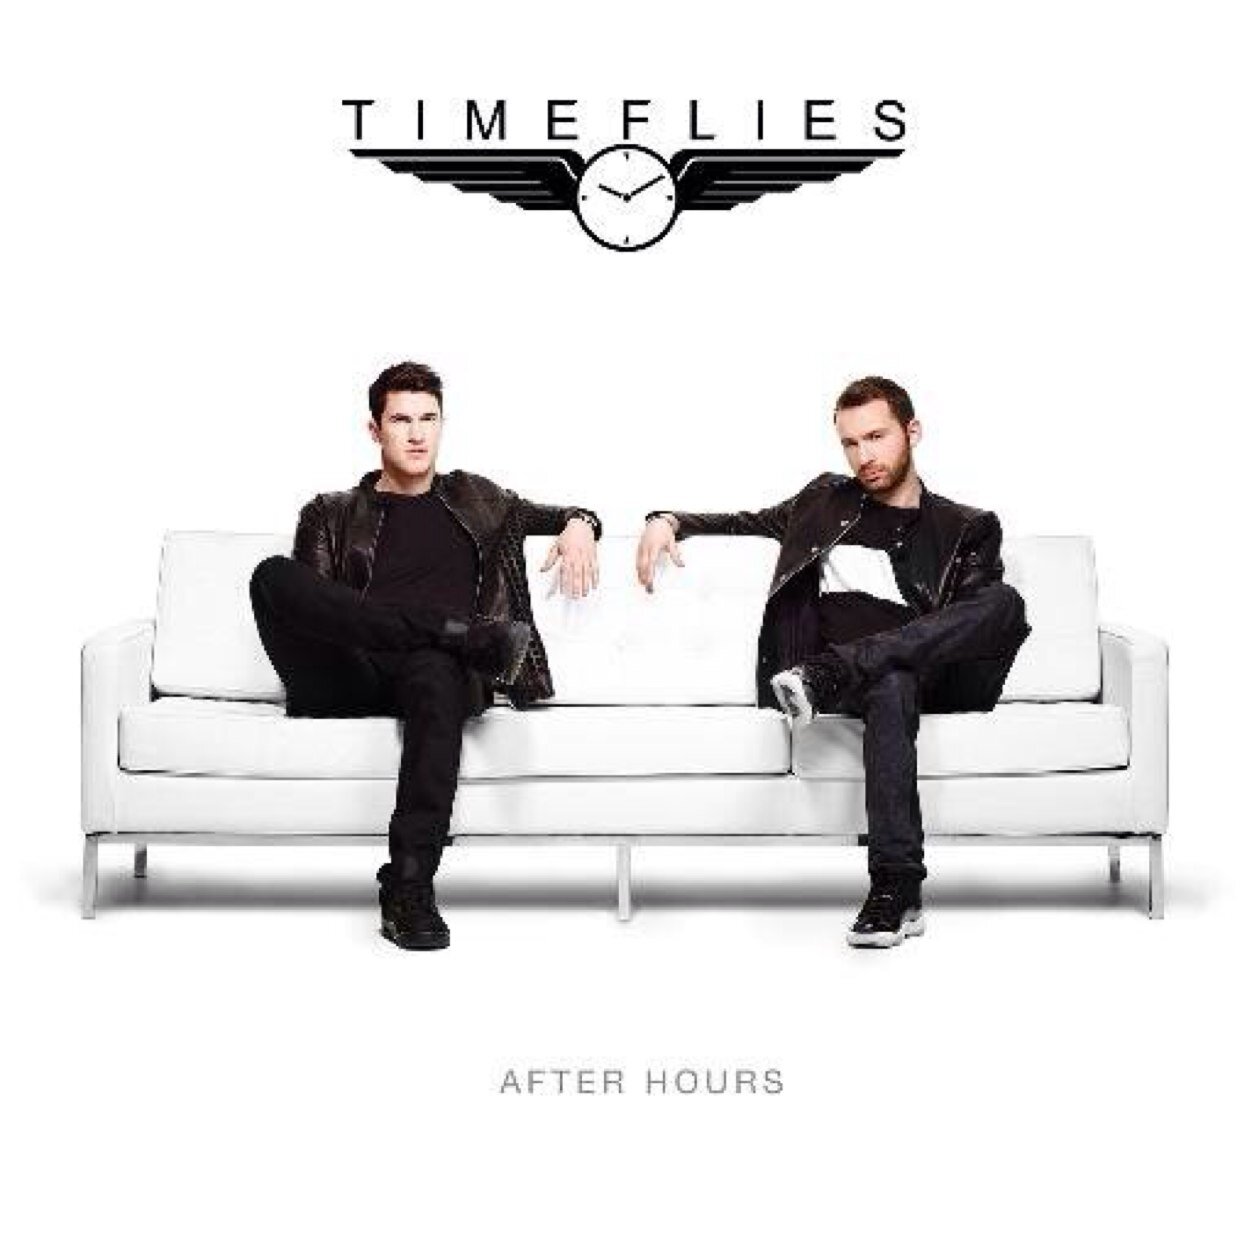 Get our new album After Hours here http://t.co/Q3aiutuAiN . Also follow @whatupcal @robresnick